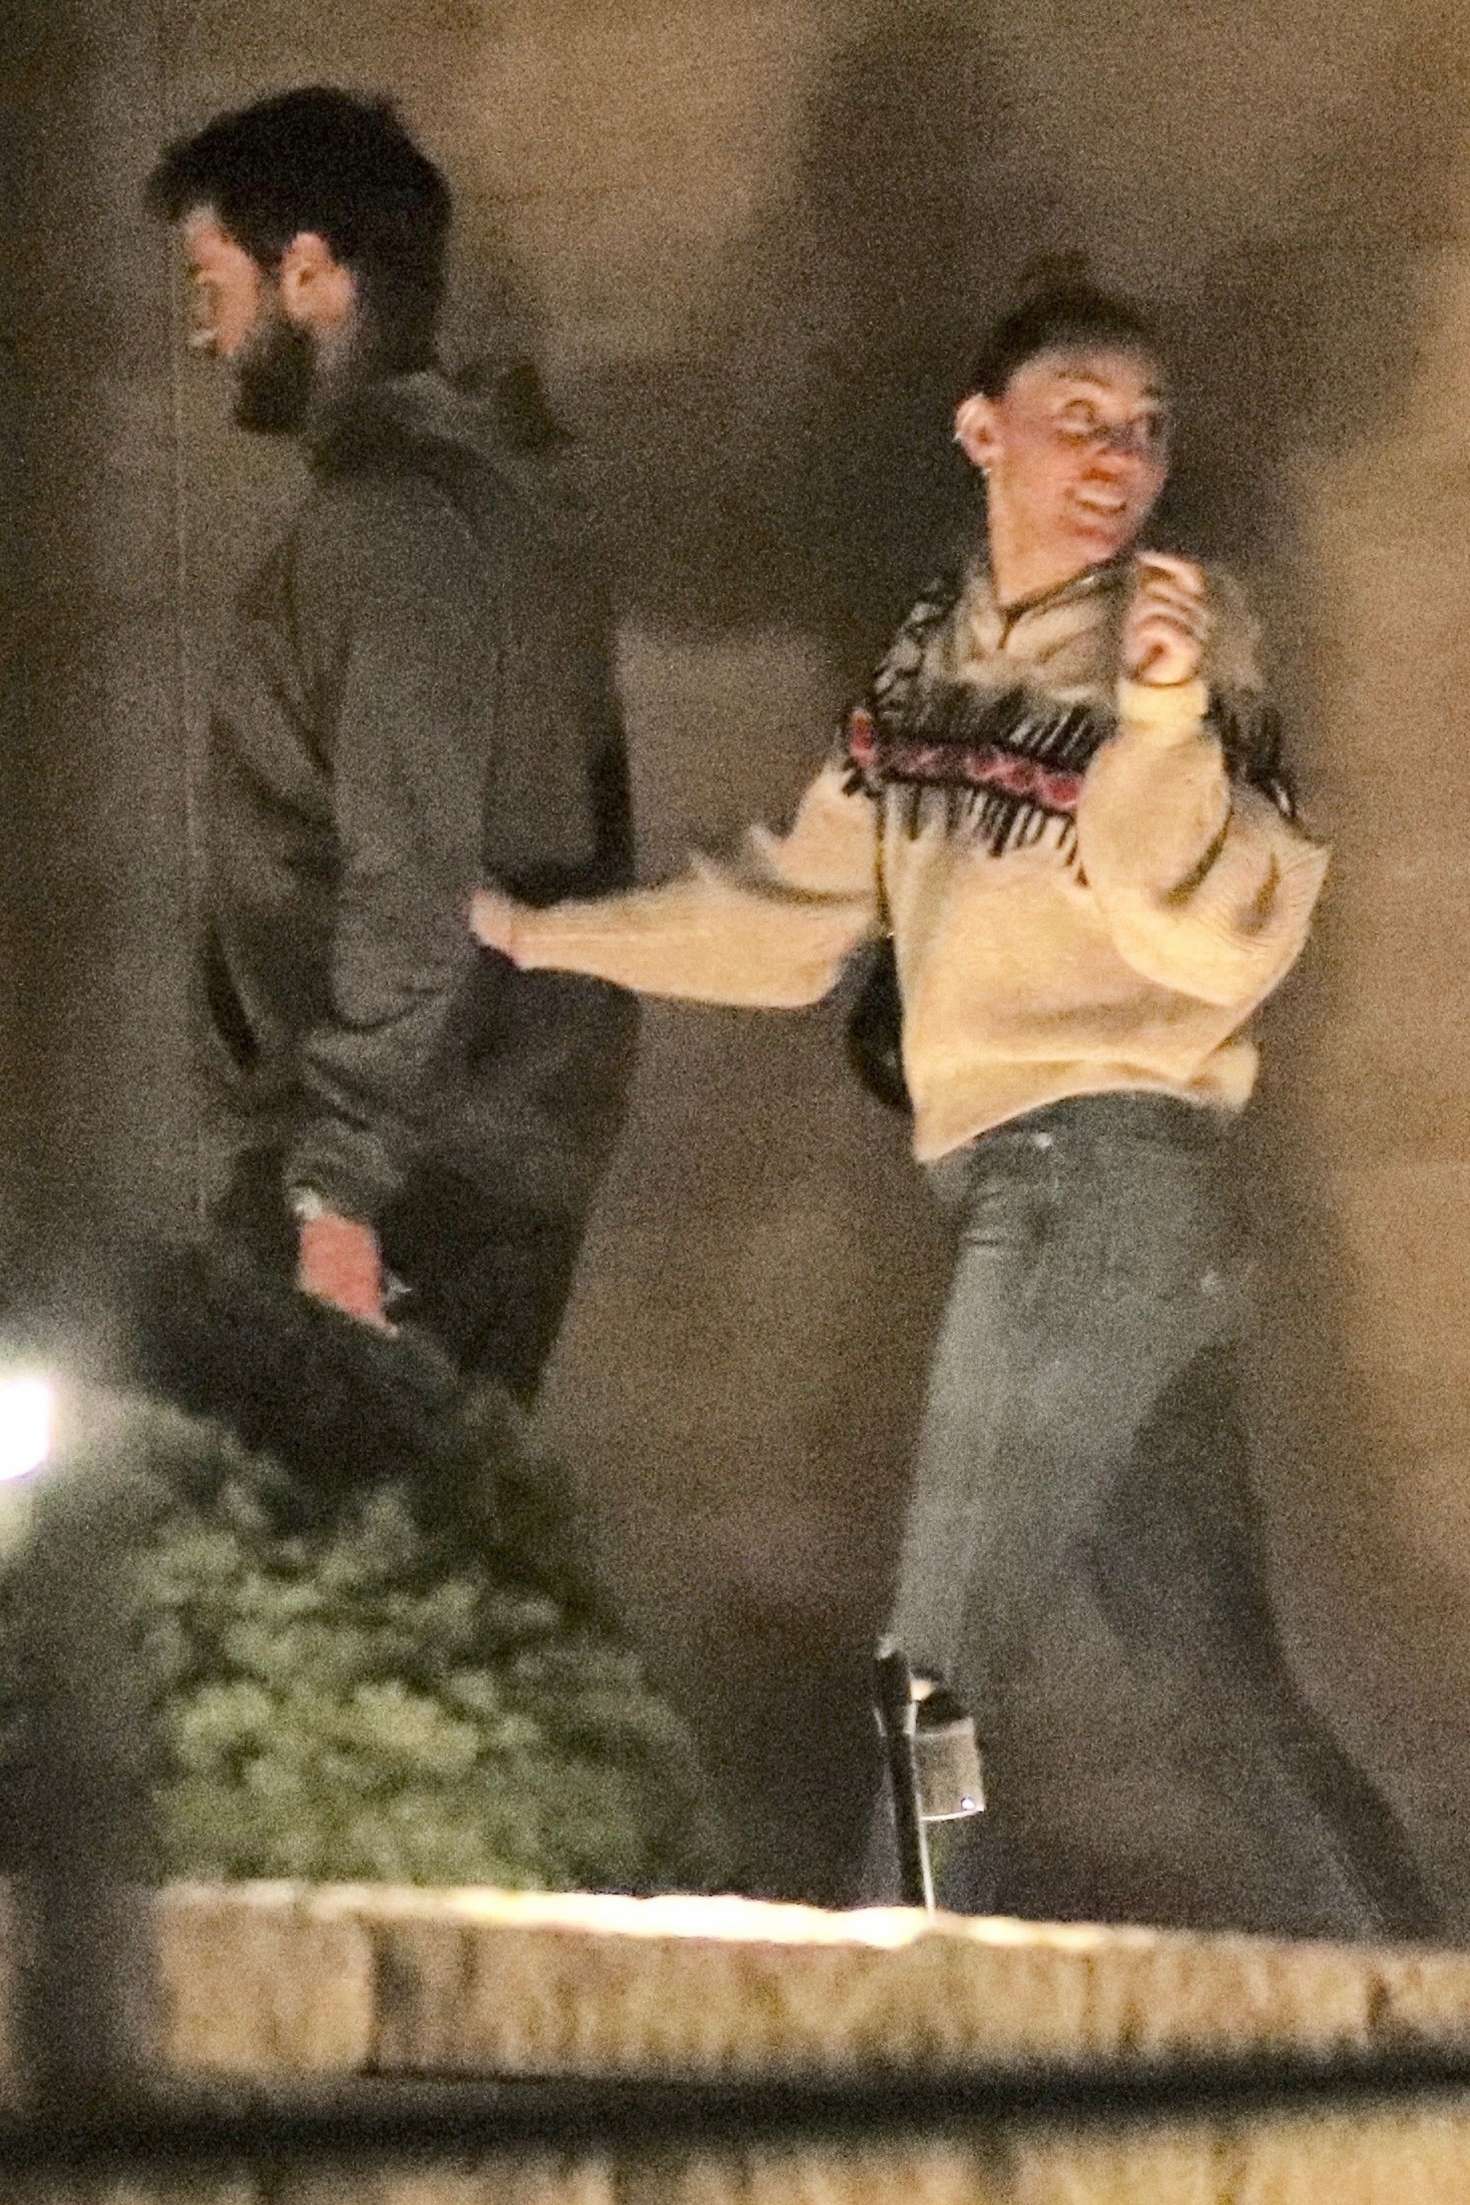 Miley Cyrus and Liam Hemsworth â€“ Out for dinner at Nobu in Malibu